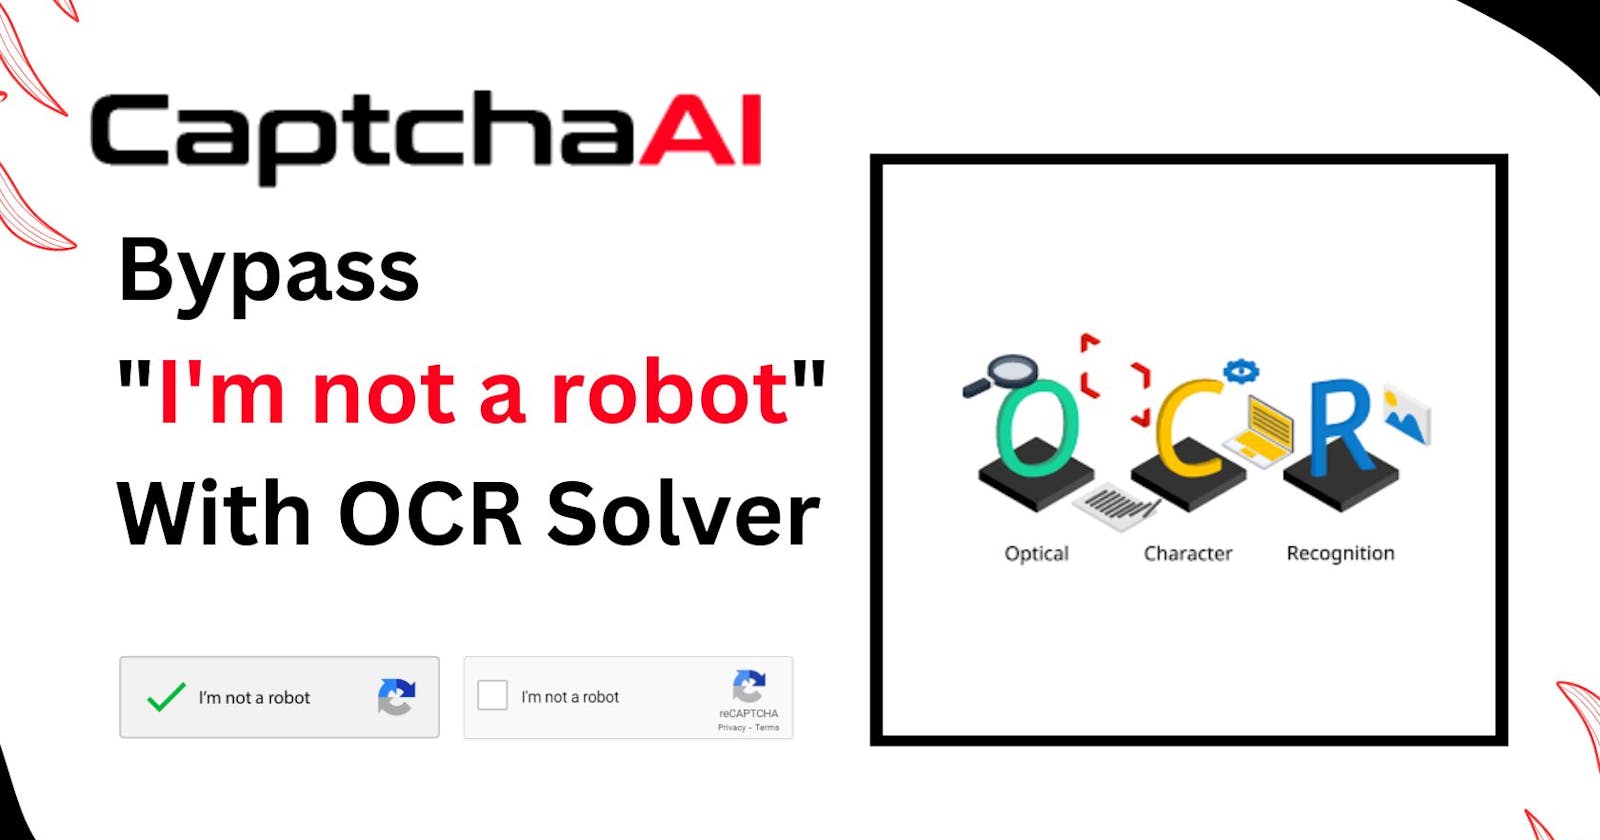 How to bypass "I'm not a robot" with OCR Solver?